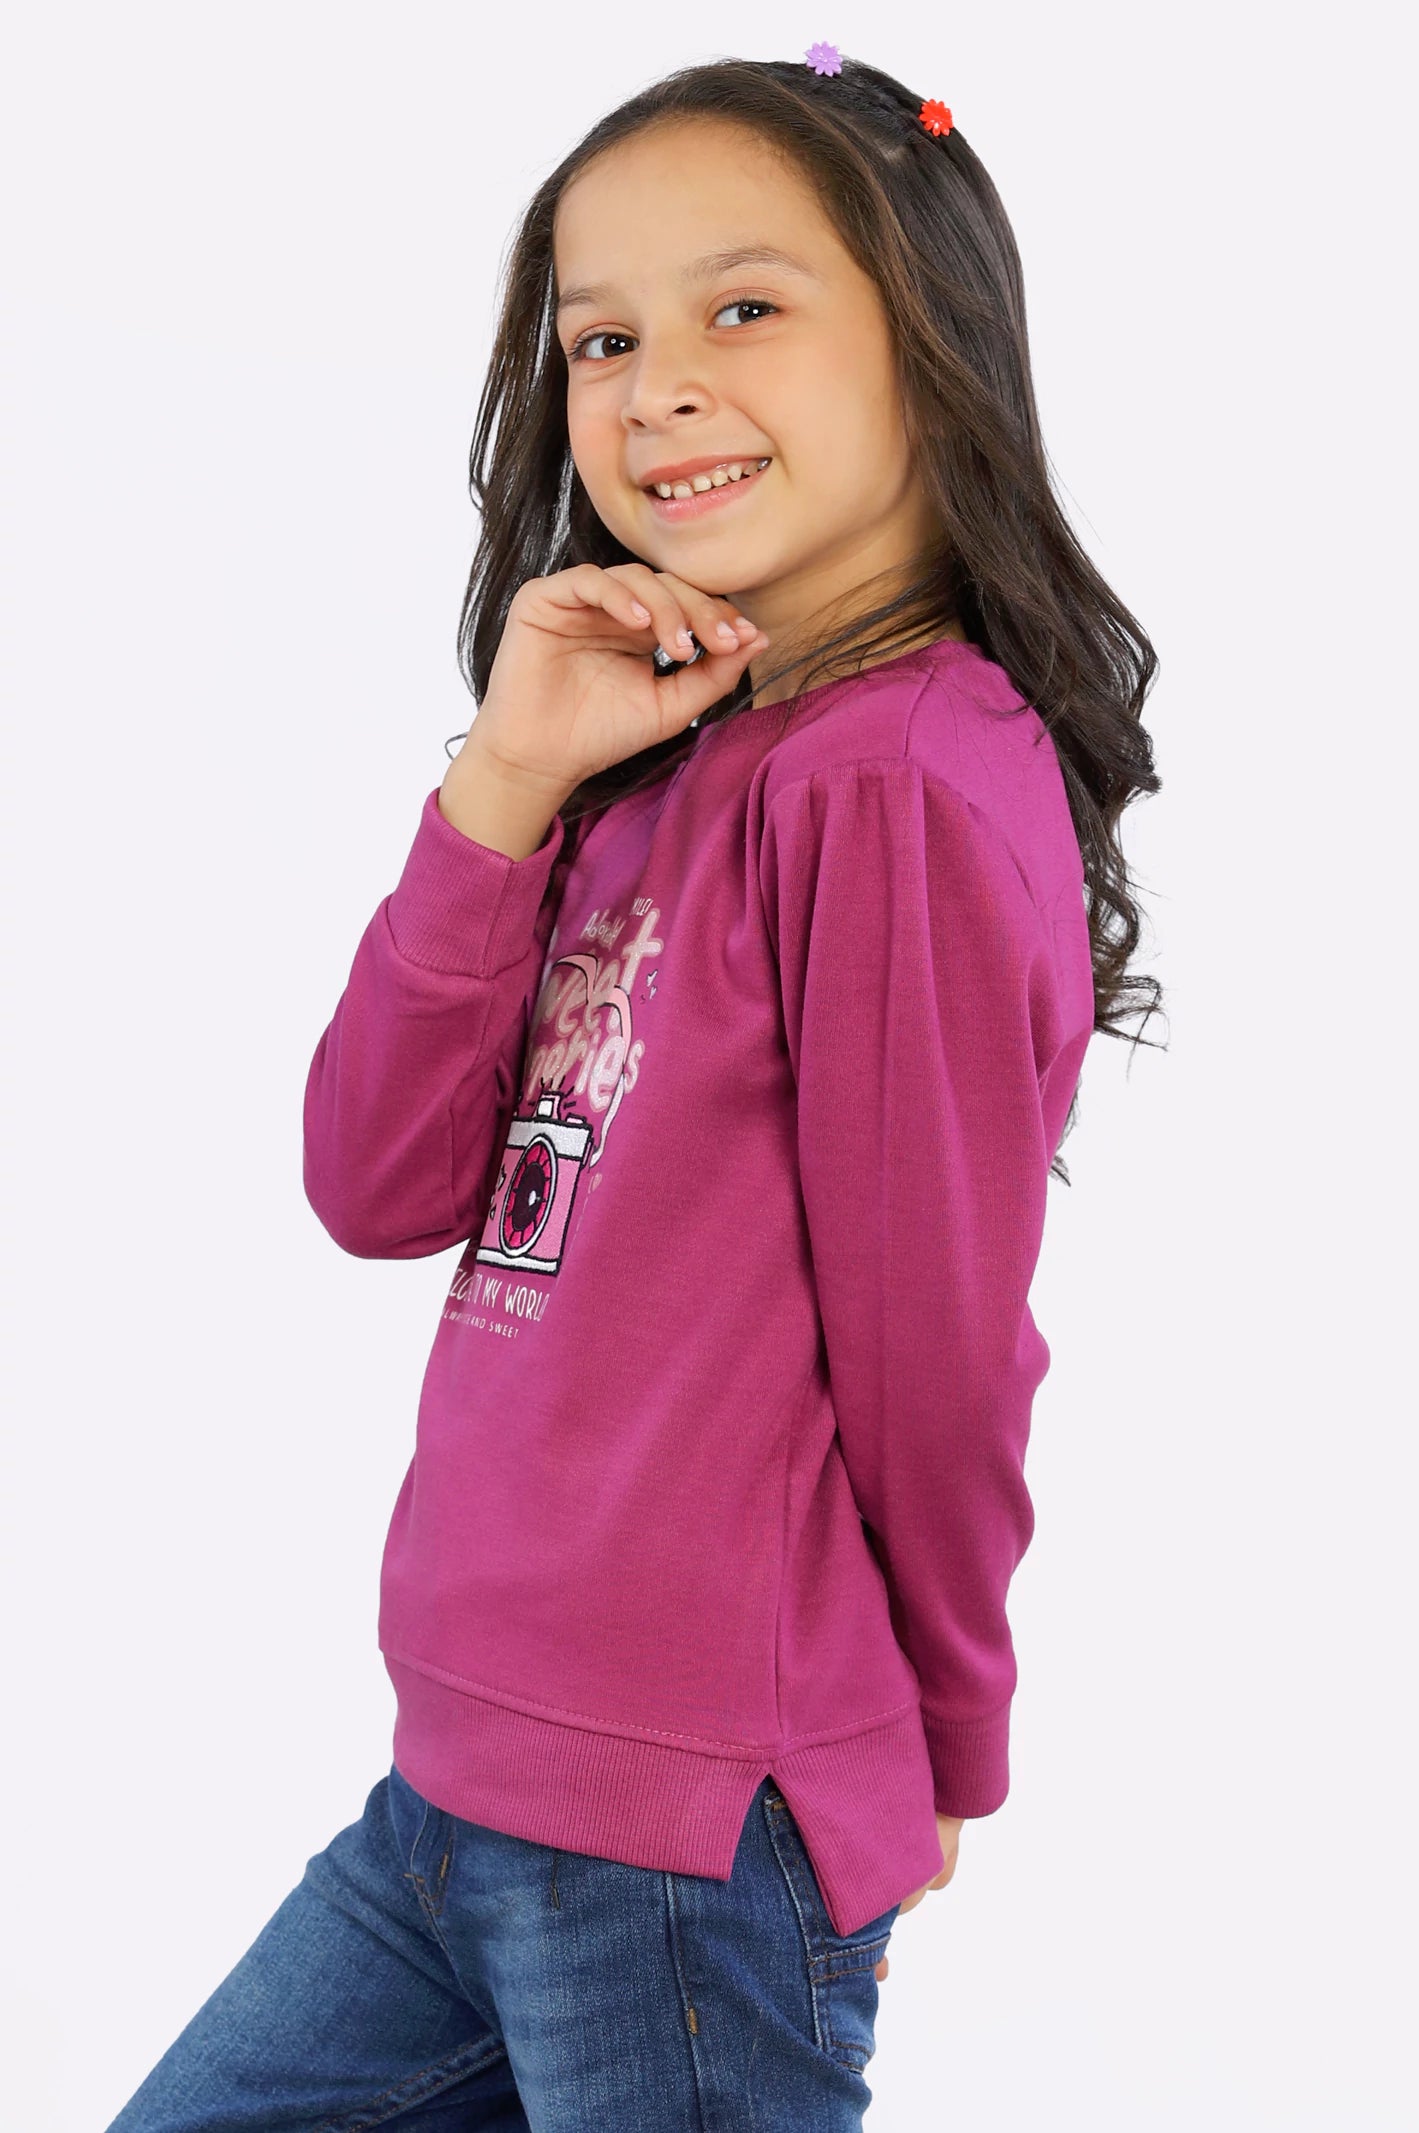 Graphic Printed Girls Sweatshirt From Diners